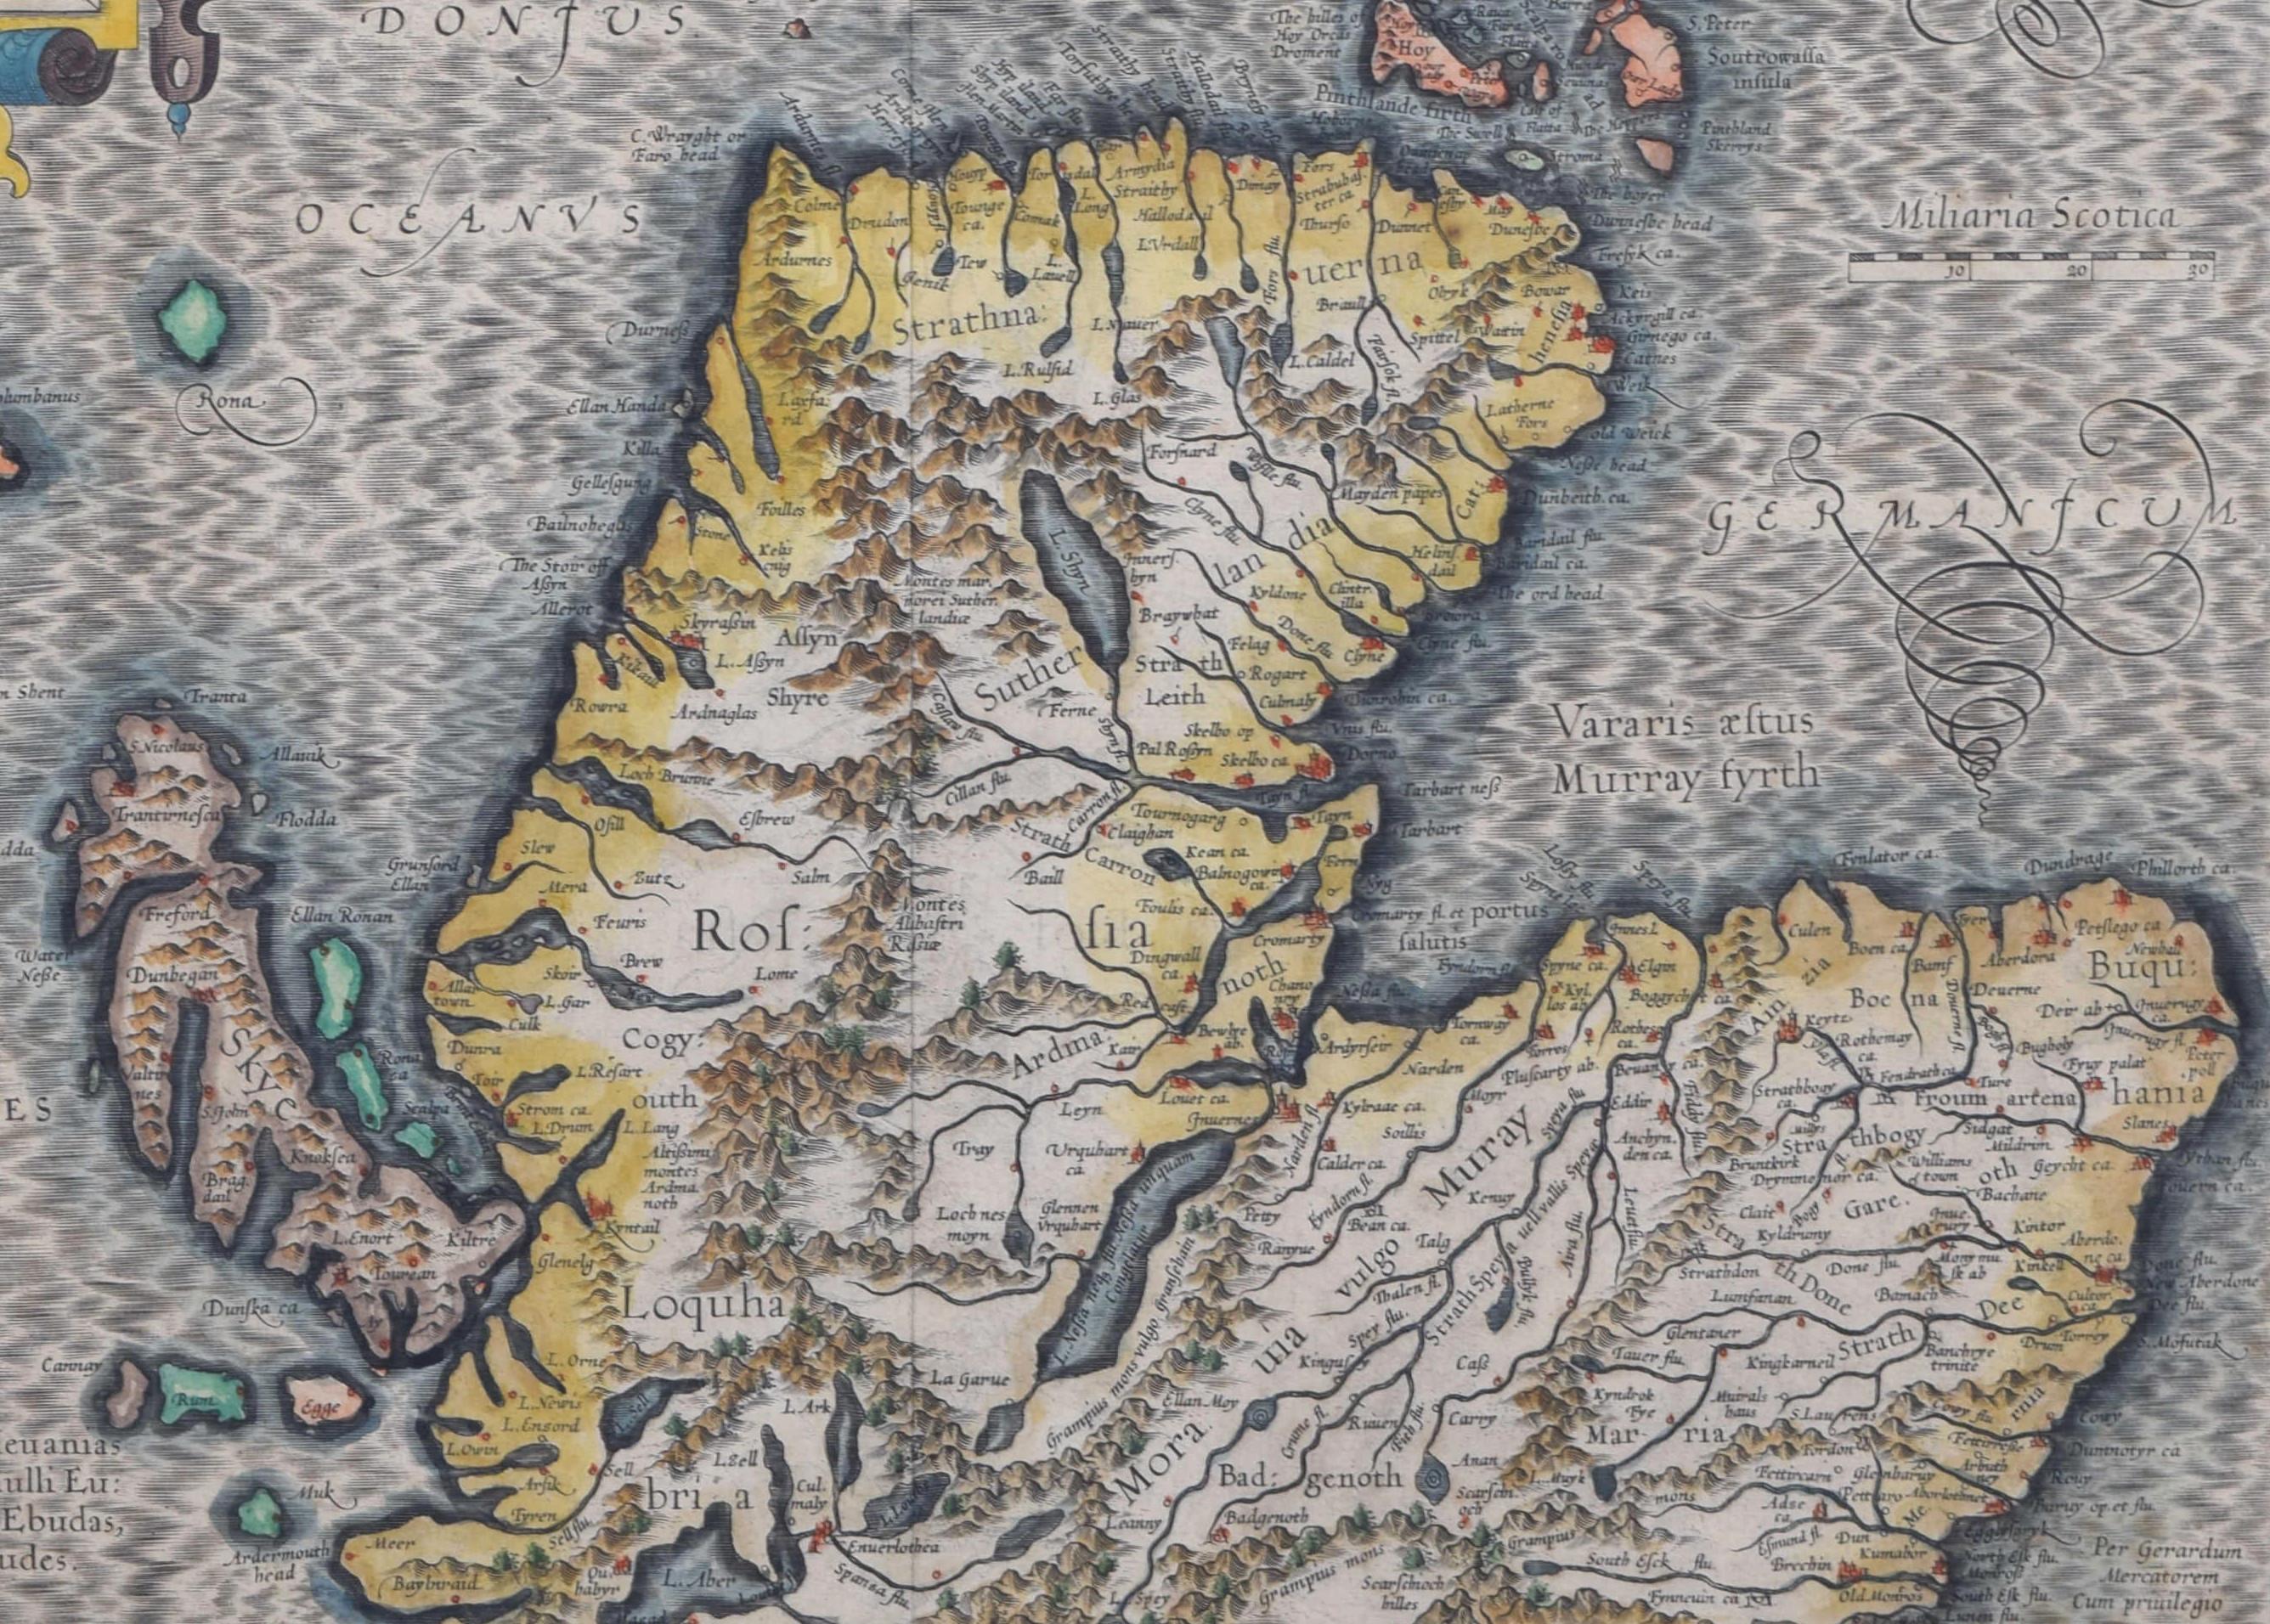 Gerardus Mercator (1512 - 1594)
Map of the North of Scotland (1683)
Engraving with later hand colouring
35 x 45 cm

A fantastically characterful and detailed map engraving of the North of Scotland from 1683. The highly detailed and beautifully